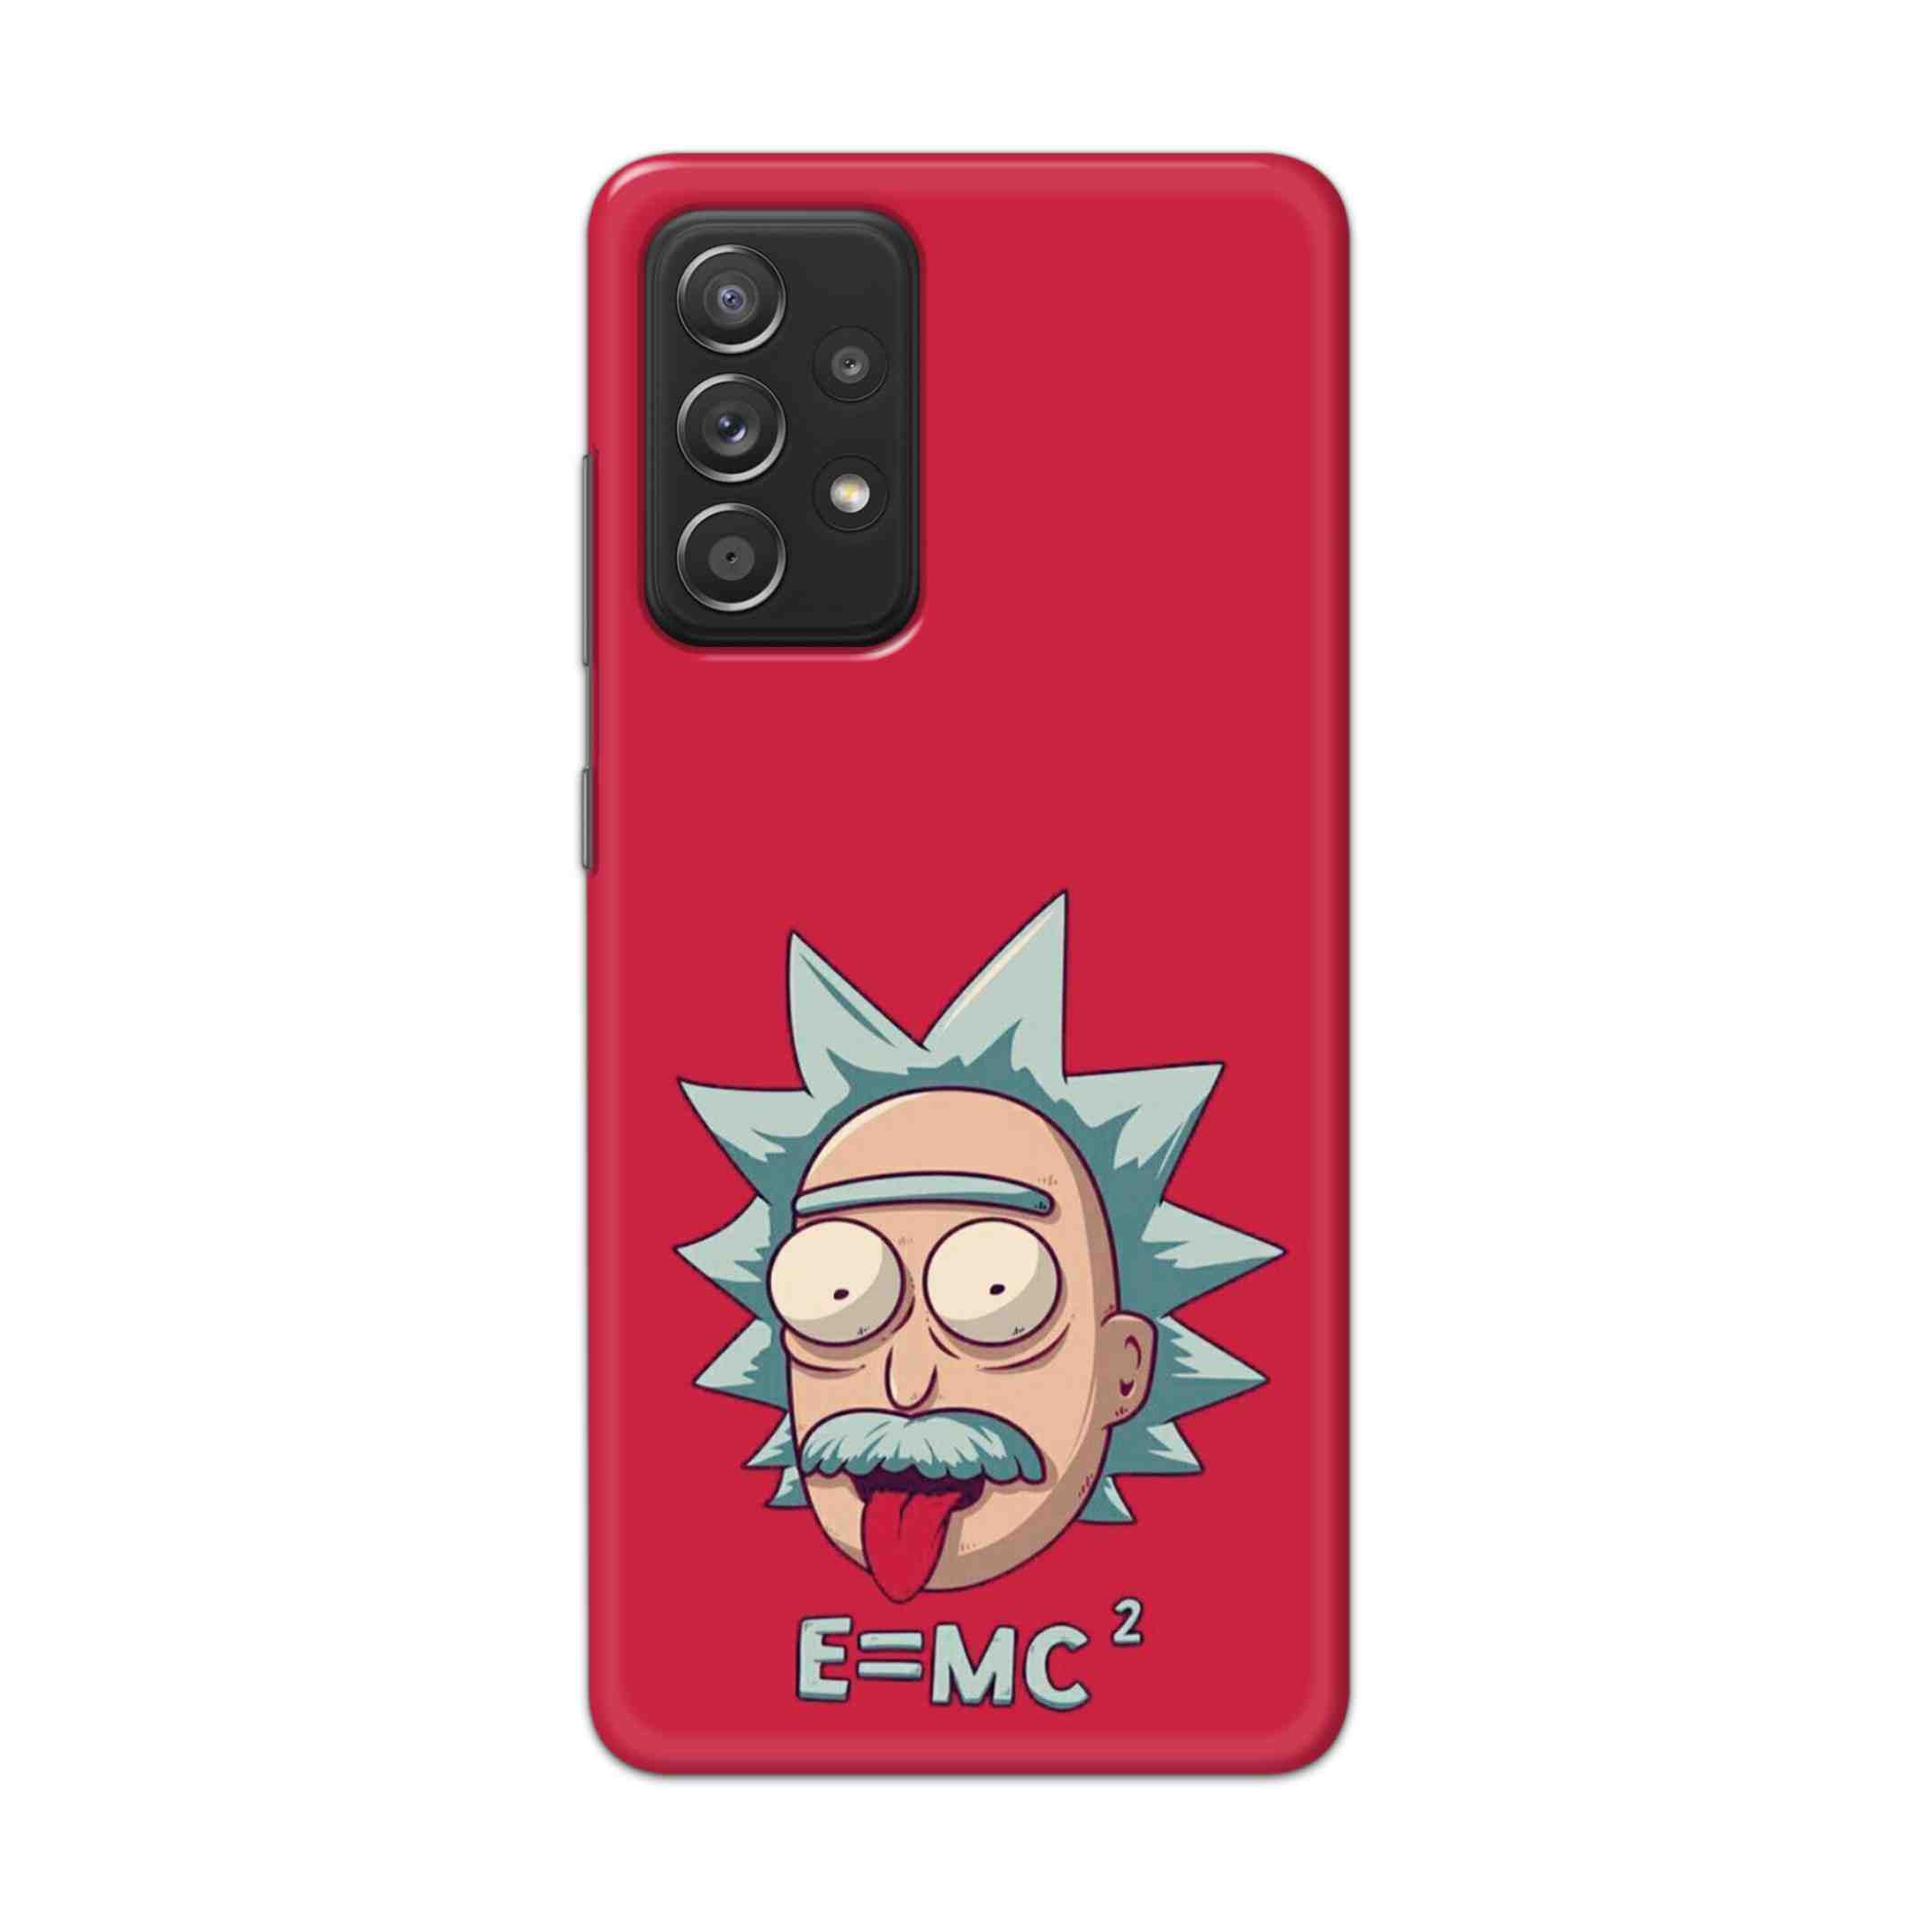 Buy E=Mc Hard Back Mobile Phone Case Cover For Samsung Galaxy A52 Online